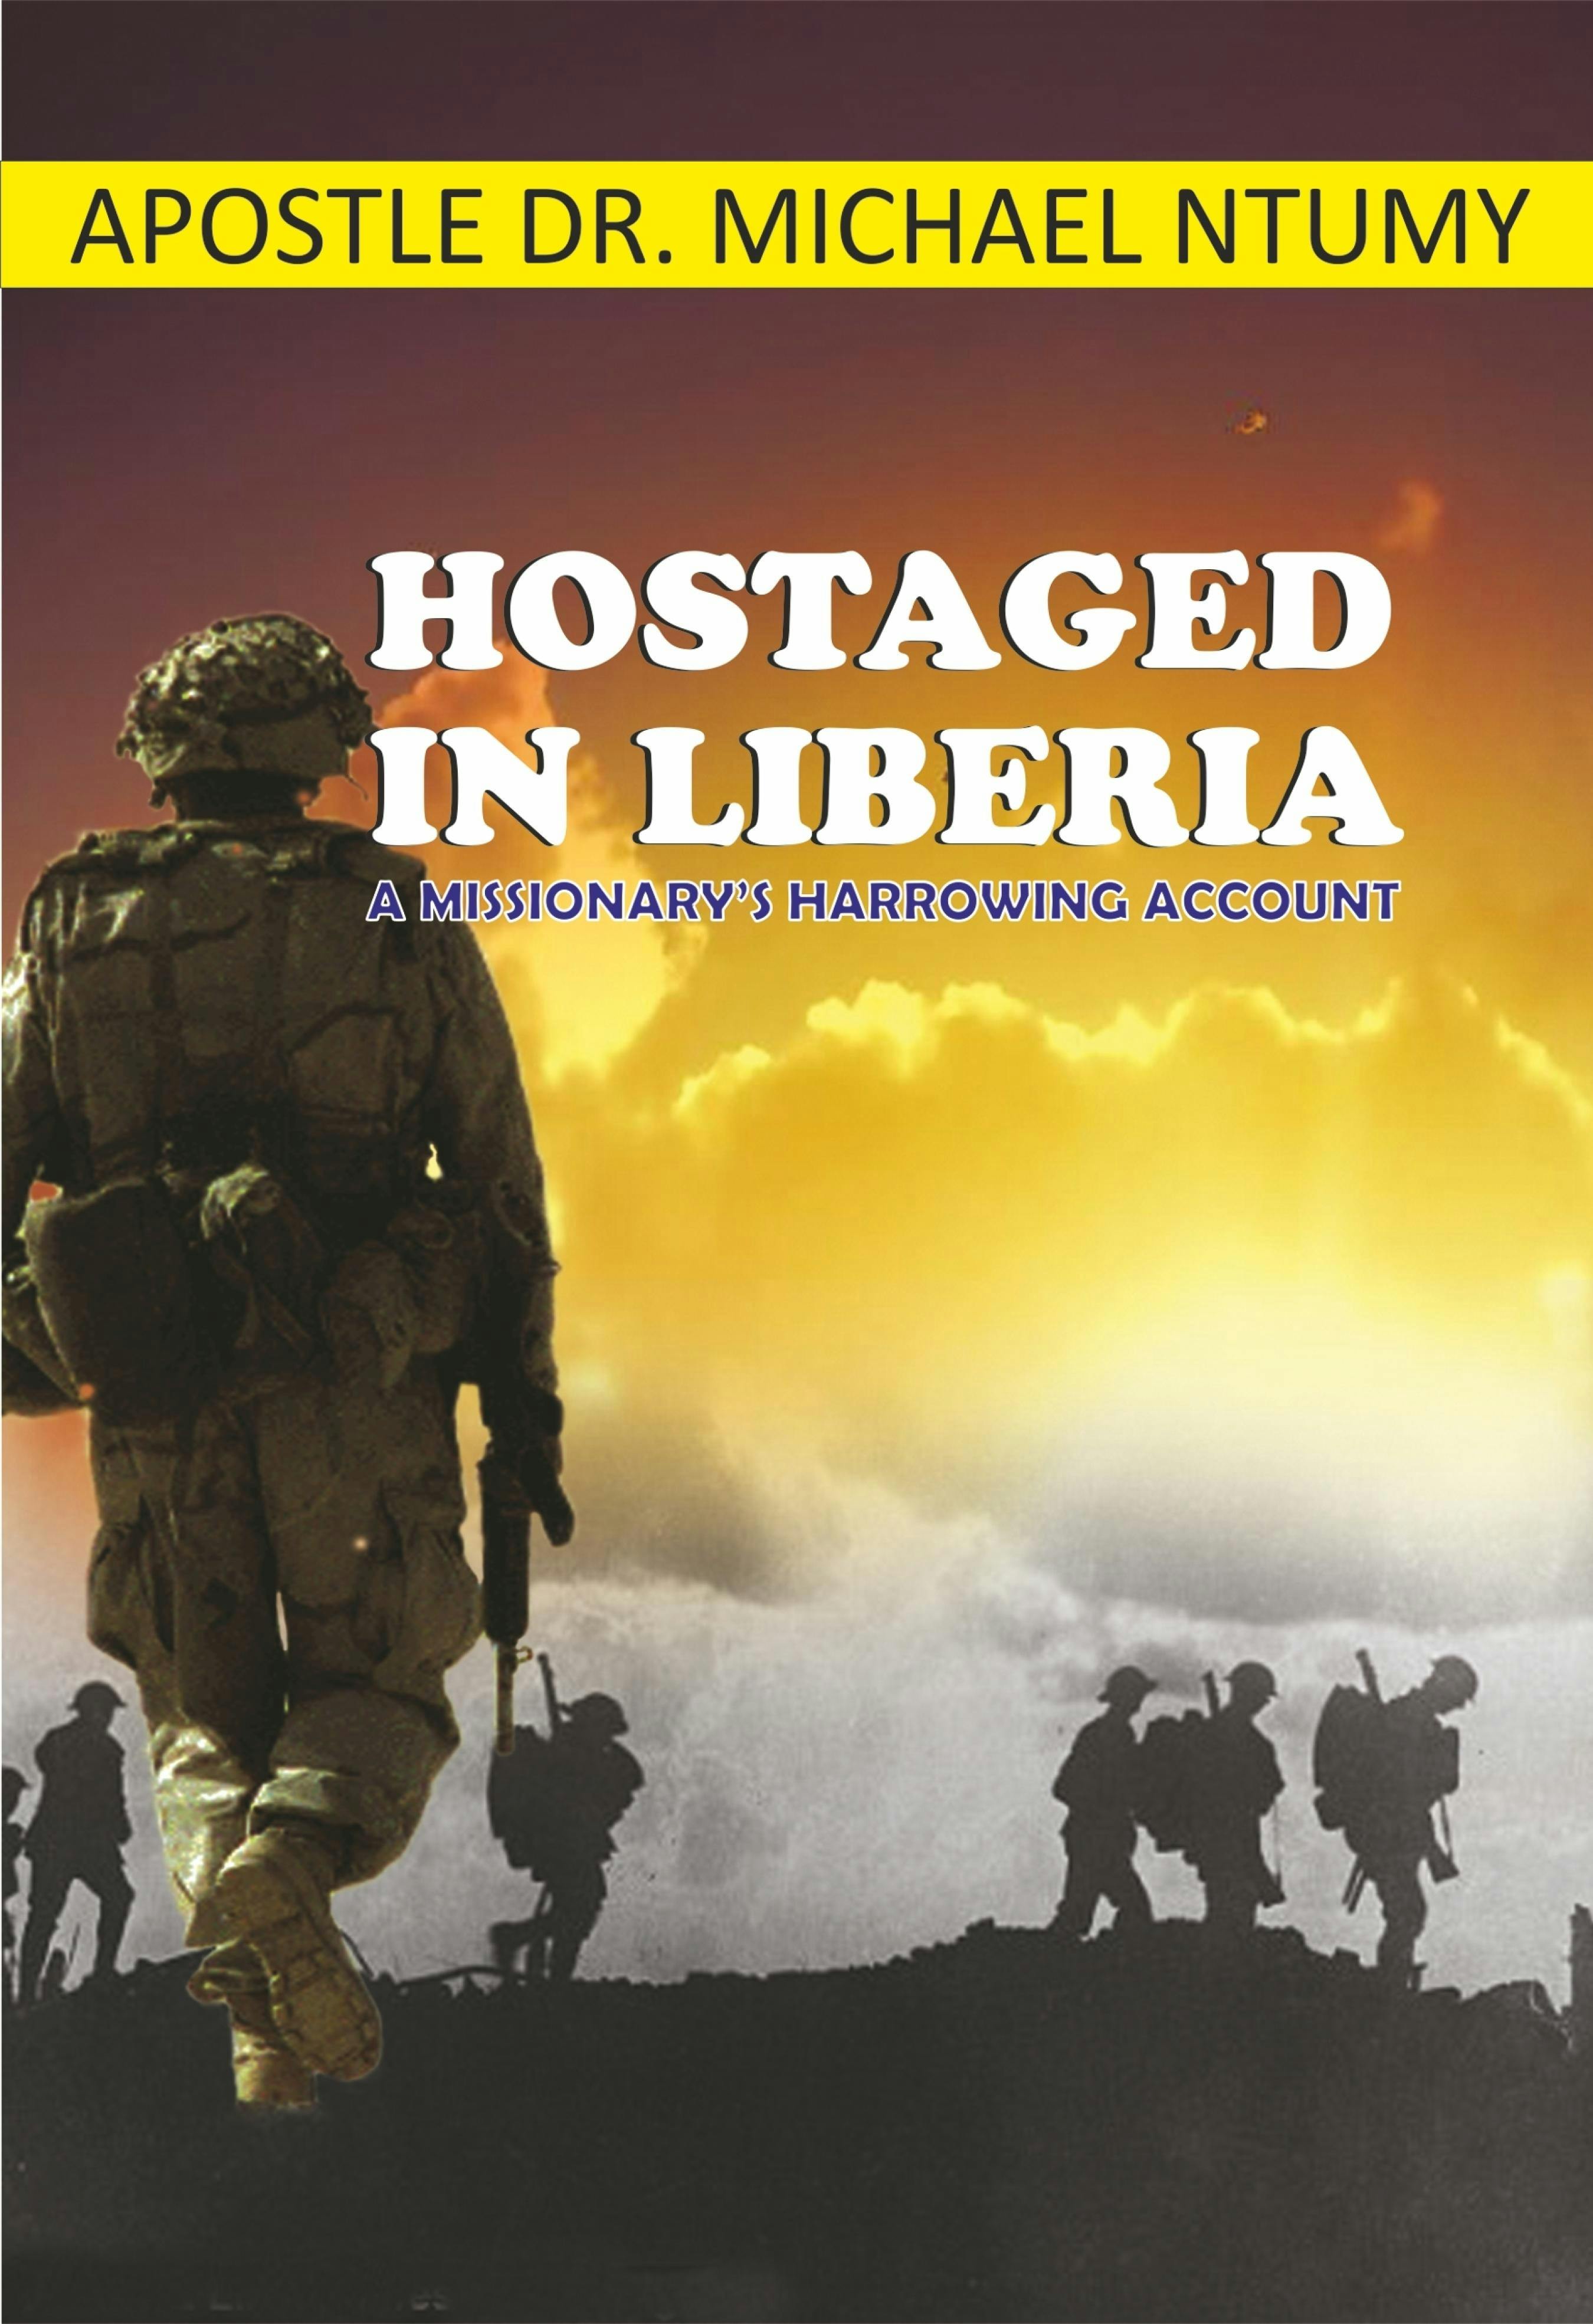 Hostaged in Liberia: A Missionary's Harrowing Account - Apostle Dr. Michael Ntumy